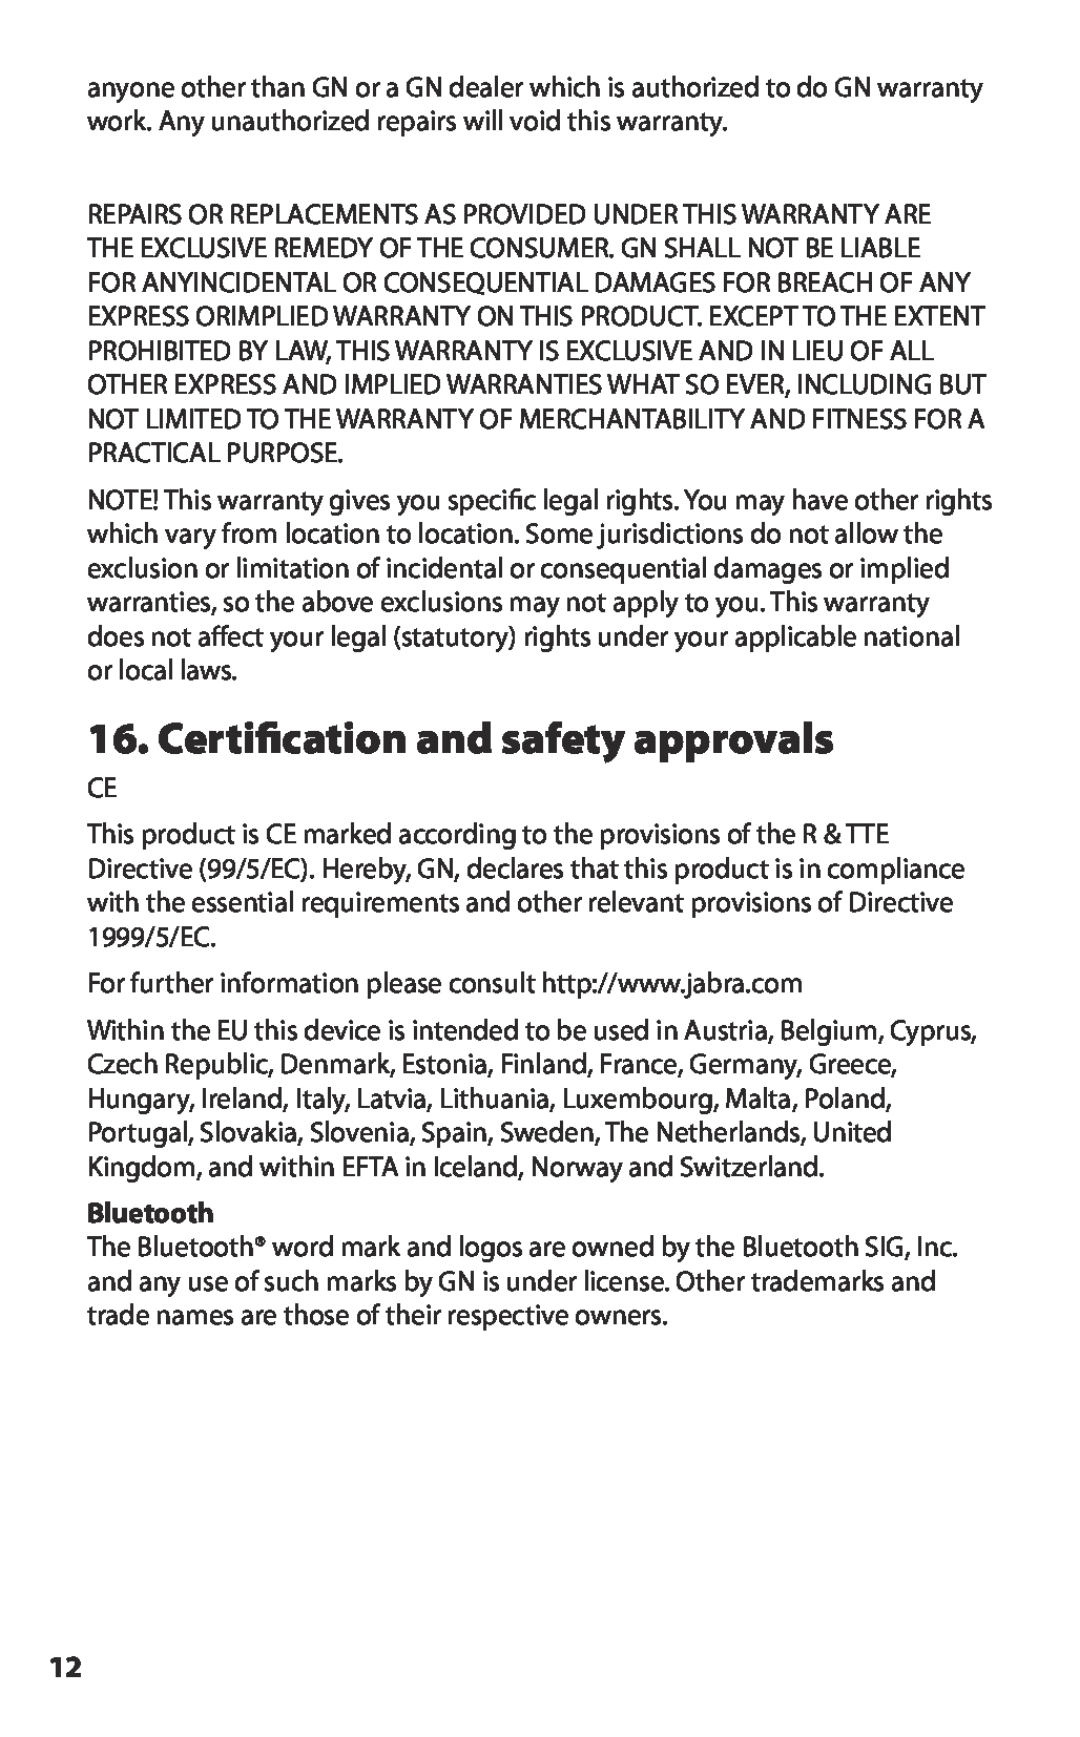 Lennox Hearth BT2010 manual Certification and safety approvals, Bluetooth 